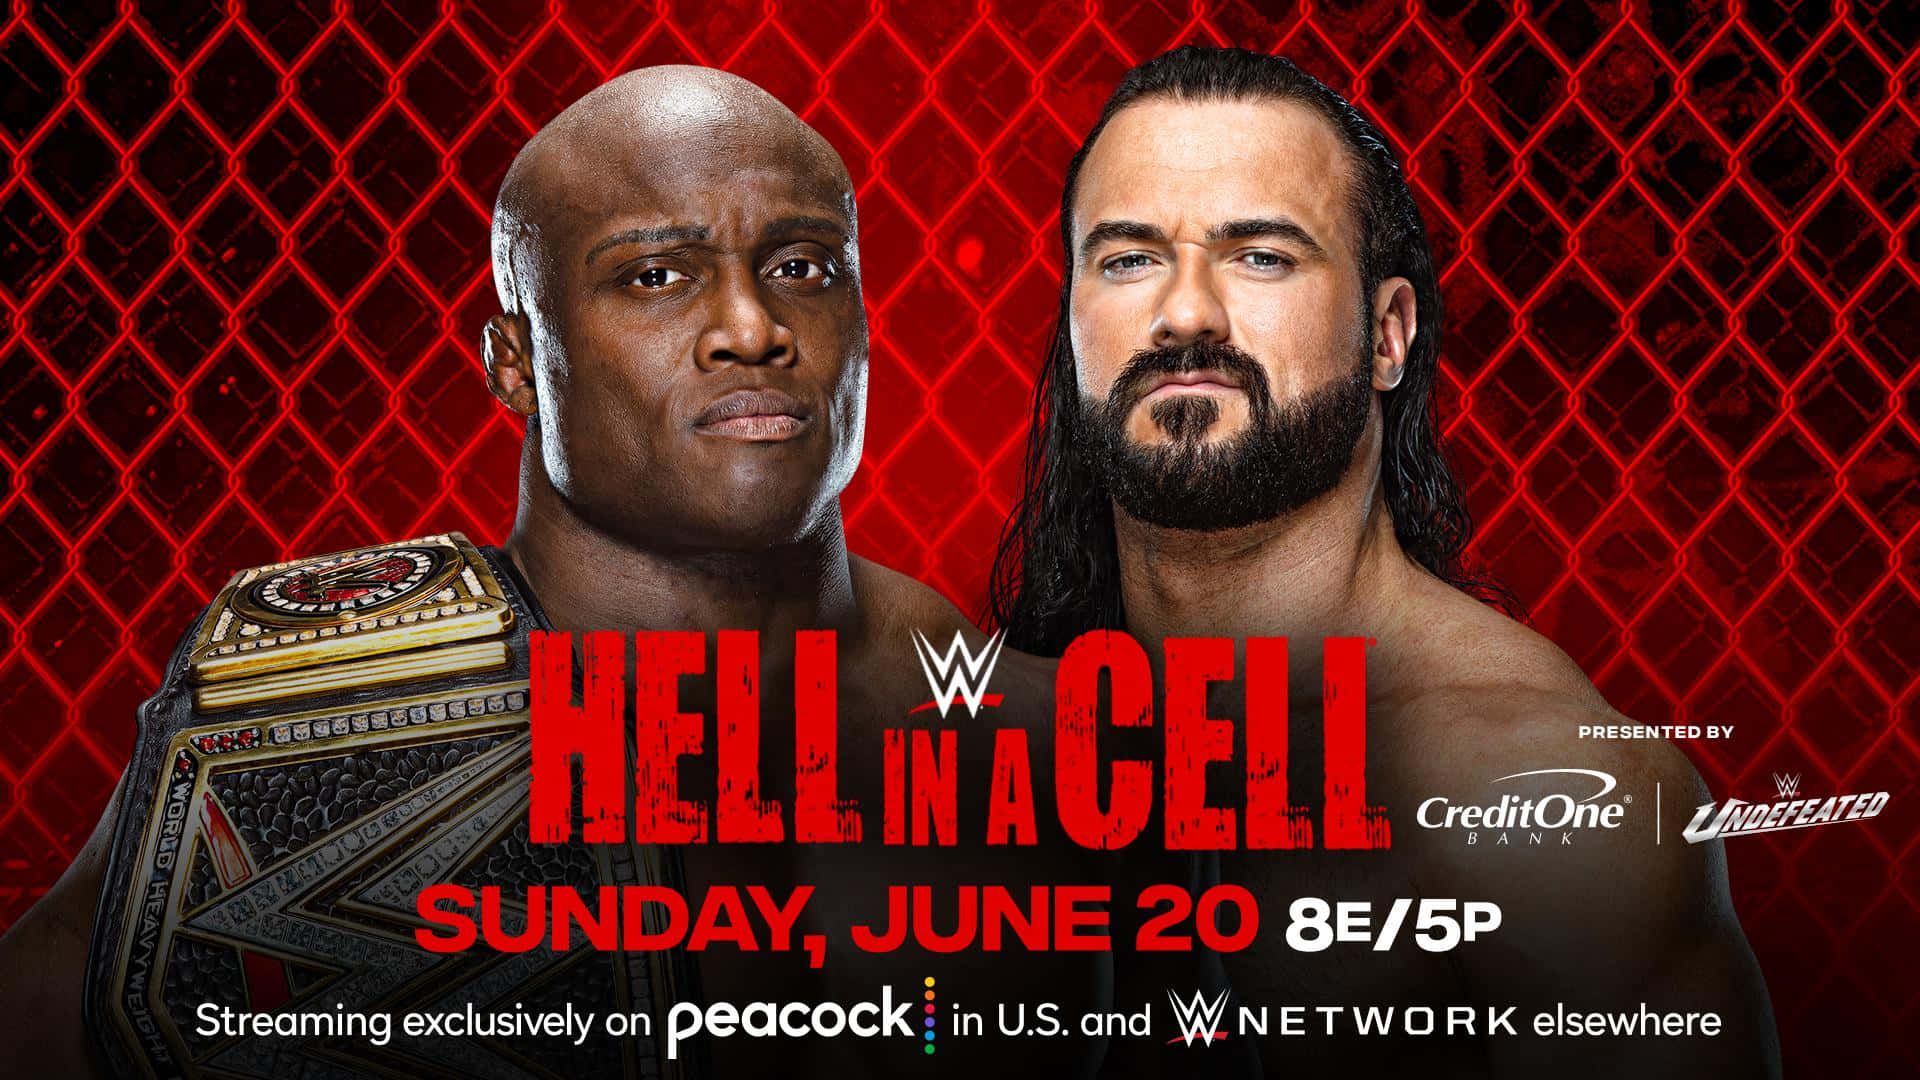 Wwe Hell In A Cell Poster Featuring Bobby Lashley Wallpaper